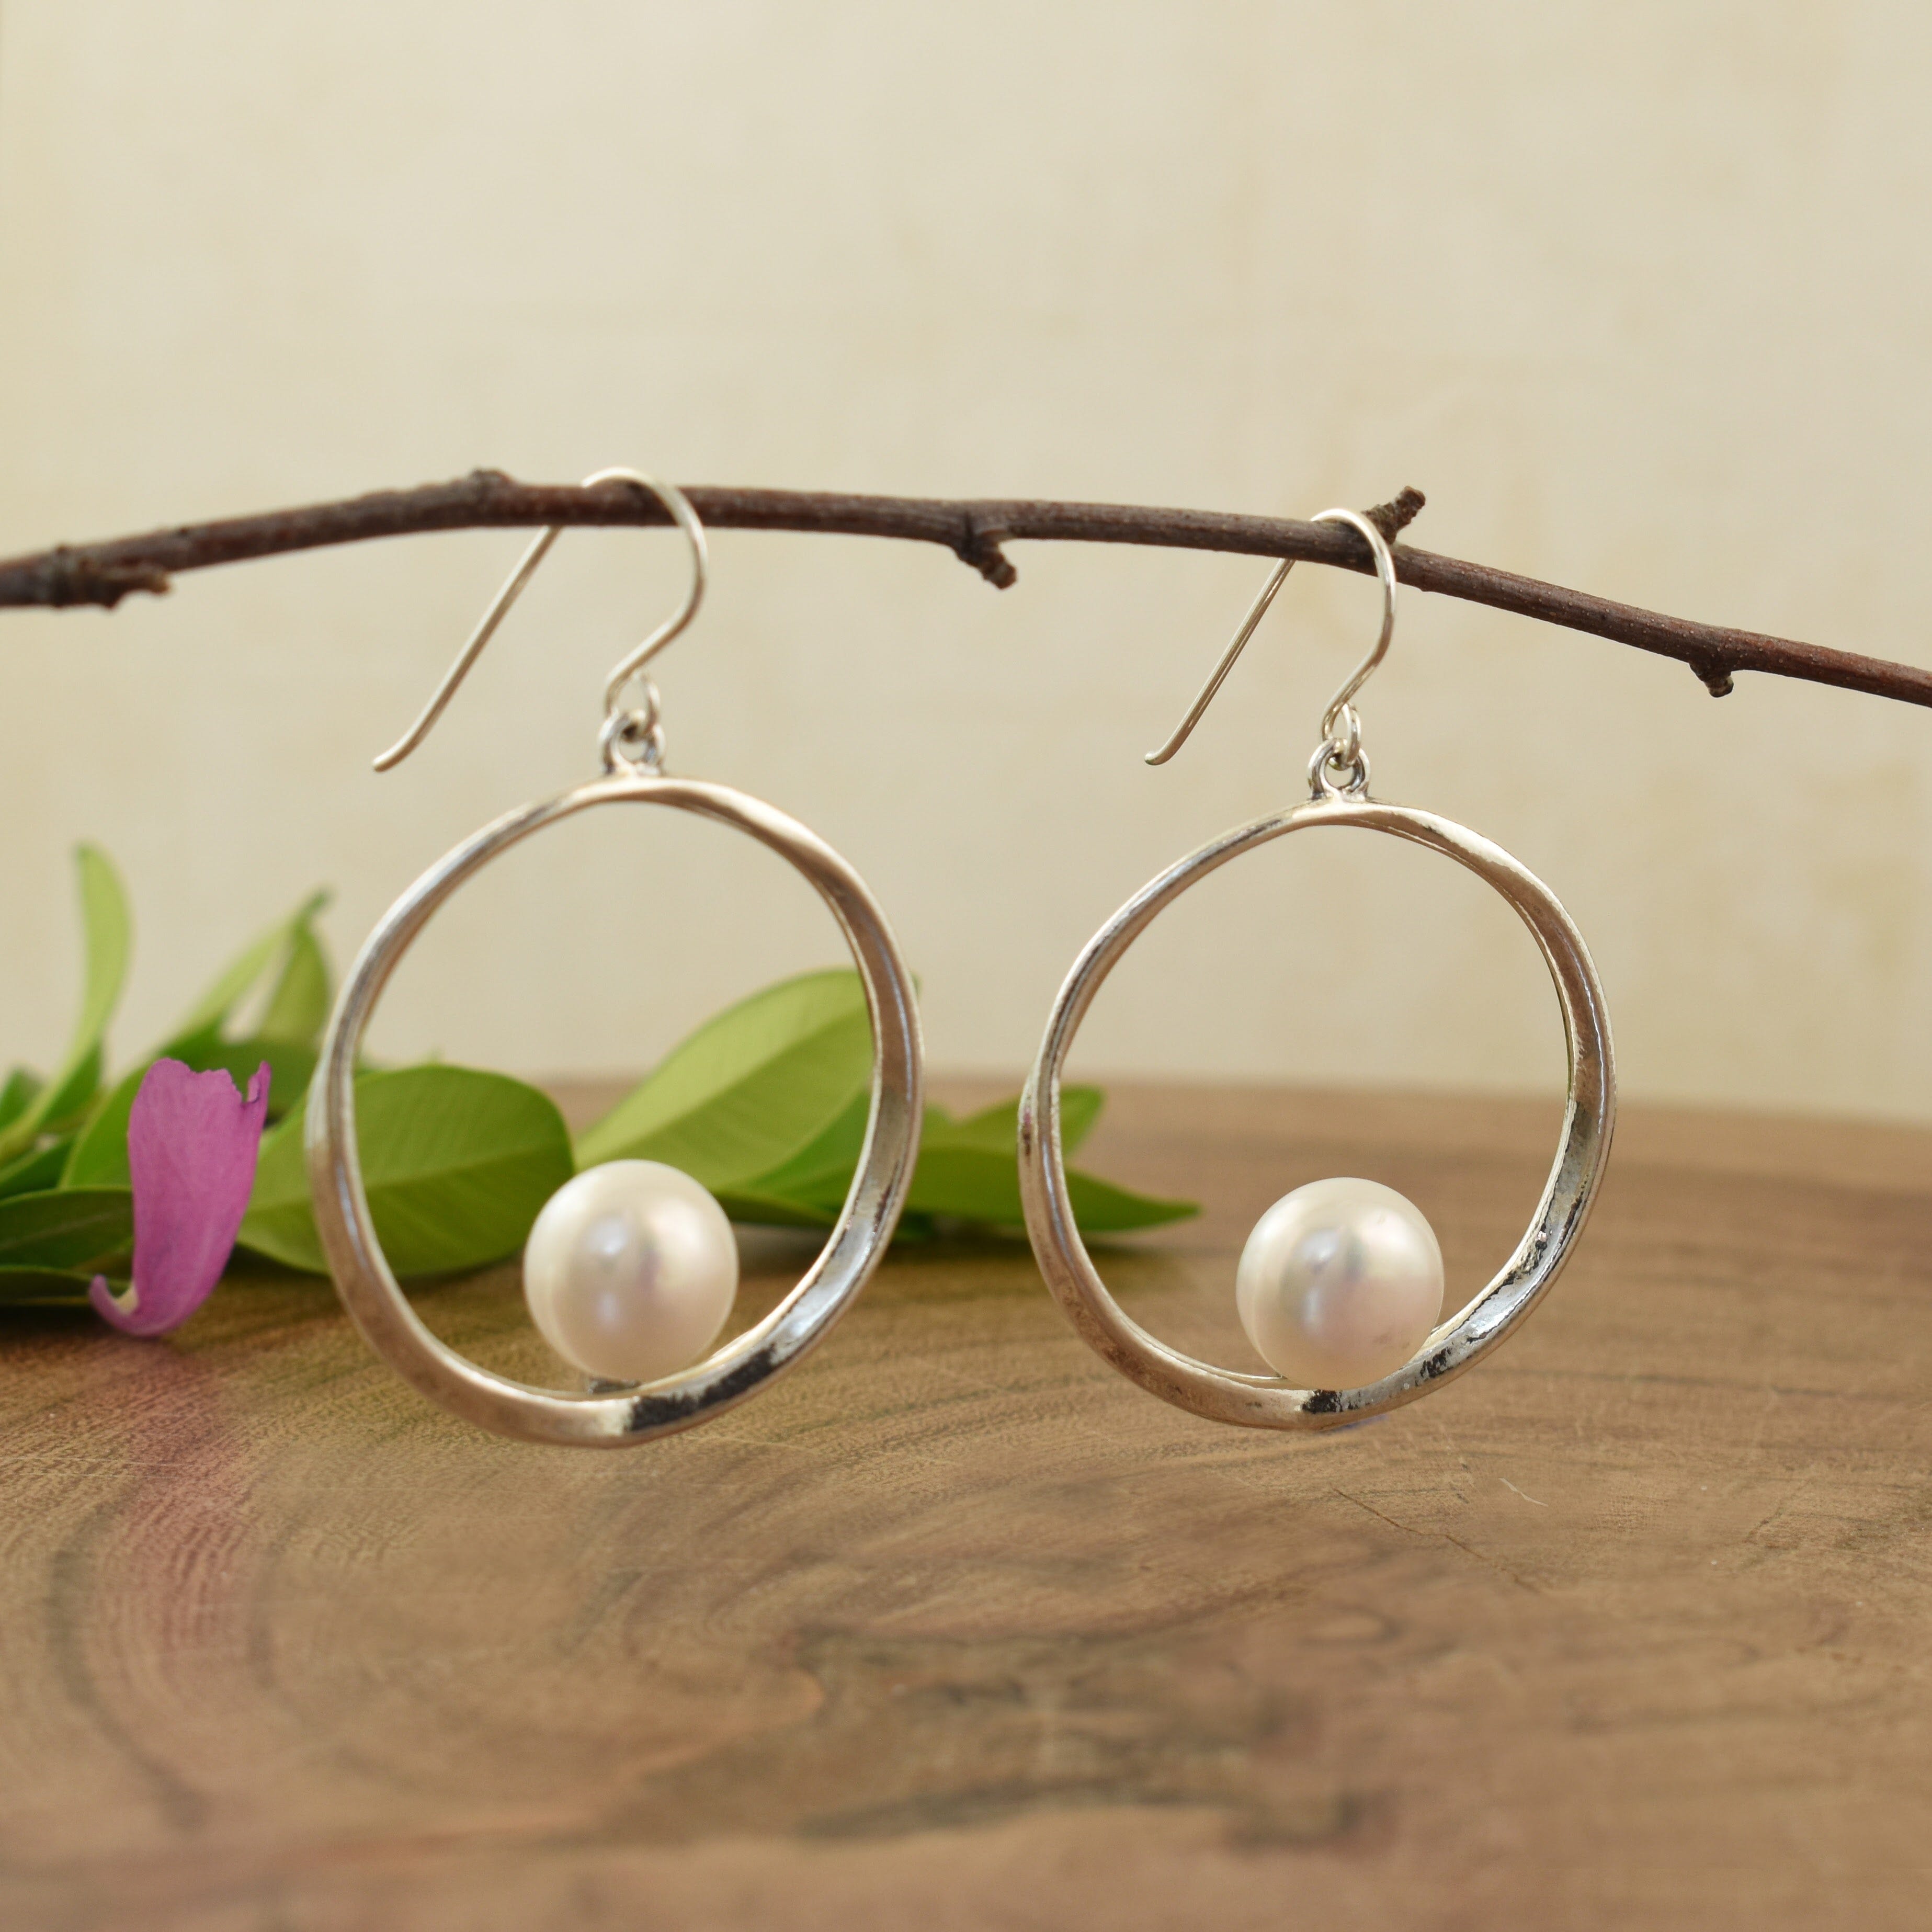 Handcrafted sterling silver and freshwater pearl earrings on French hooks